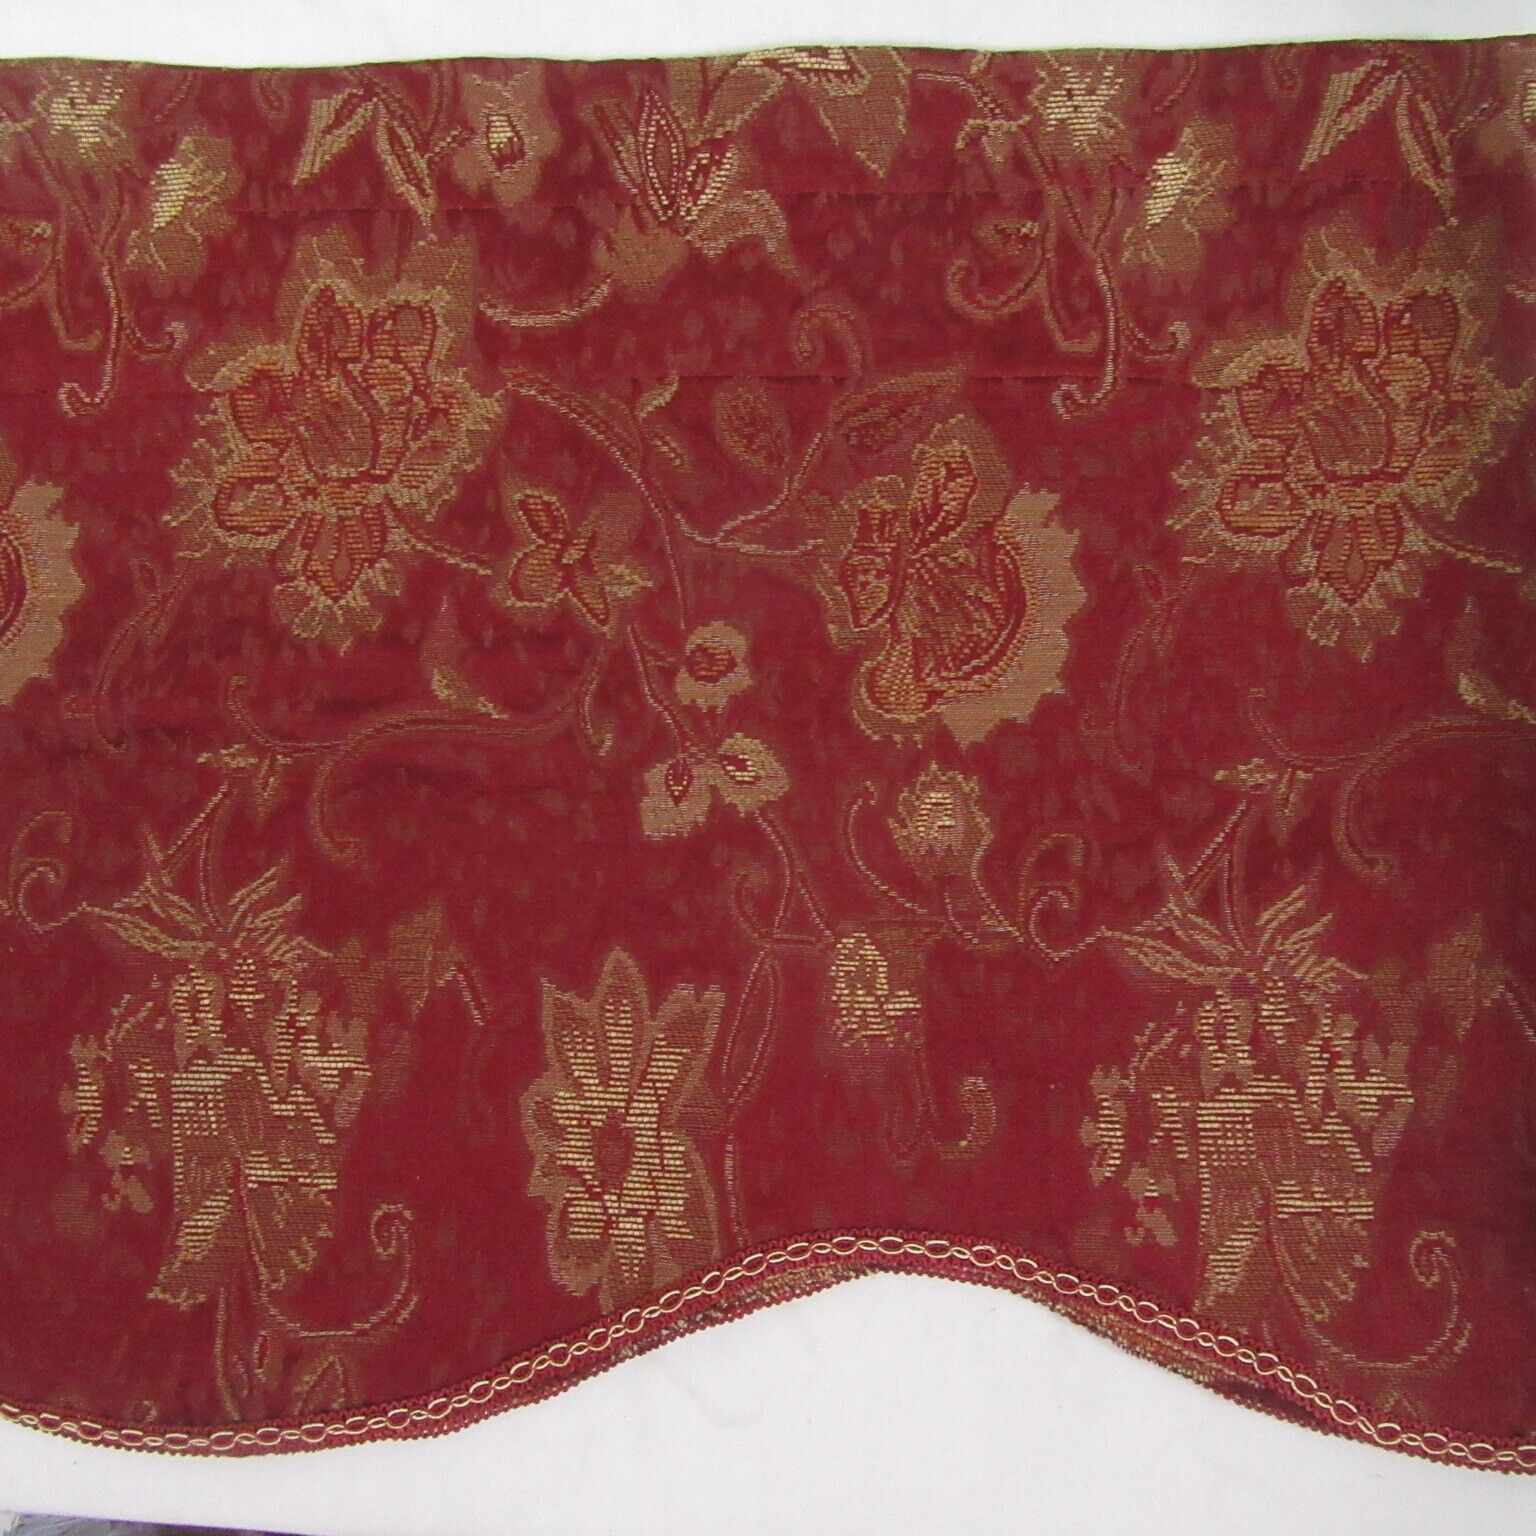 Victoria Classics Embroidered Floral Red Chenille 2-PC Scalloped Valance Set(s - $52.00